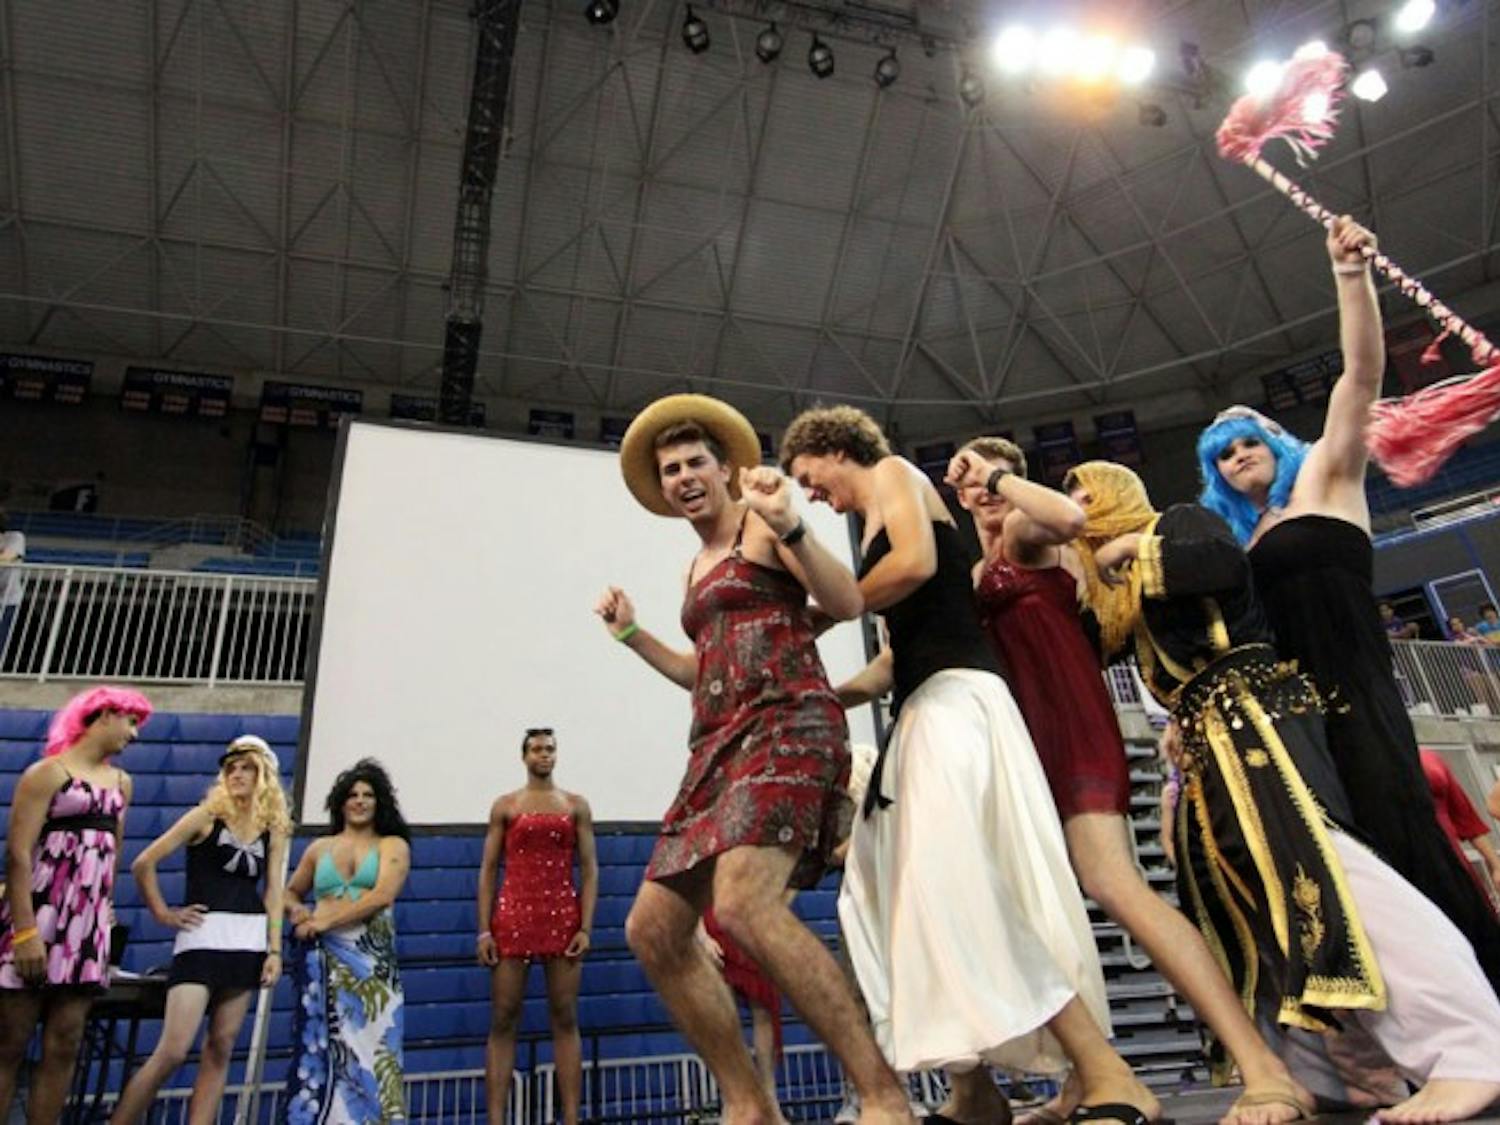 Participants of the Mr. Relay Pageant dance on stage in the Stephen C. O'Connell Center while waiting for the results of the fundraising contest. The men dressed in drag raised over $800 for Relay for Life.